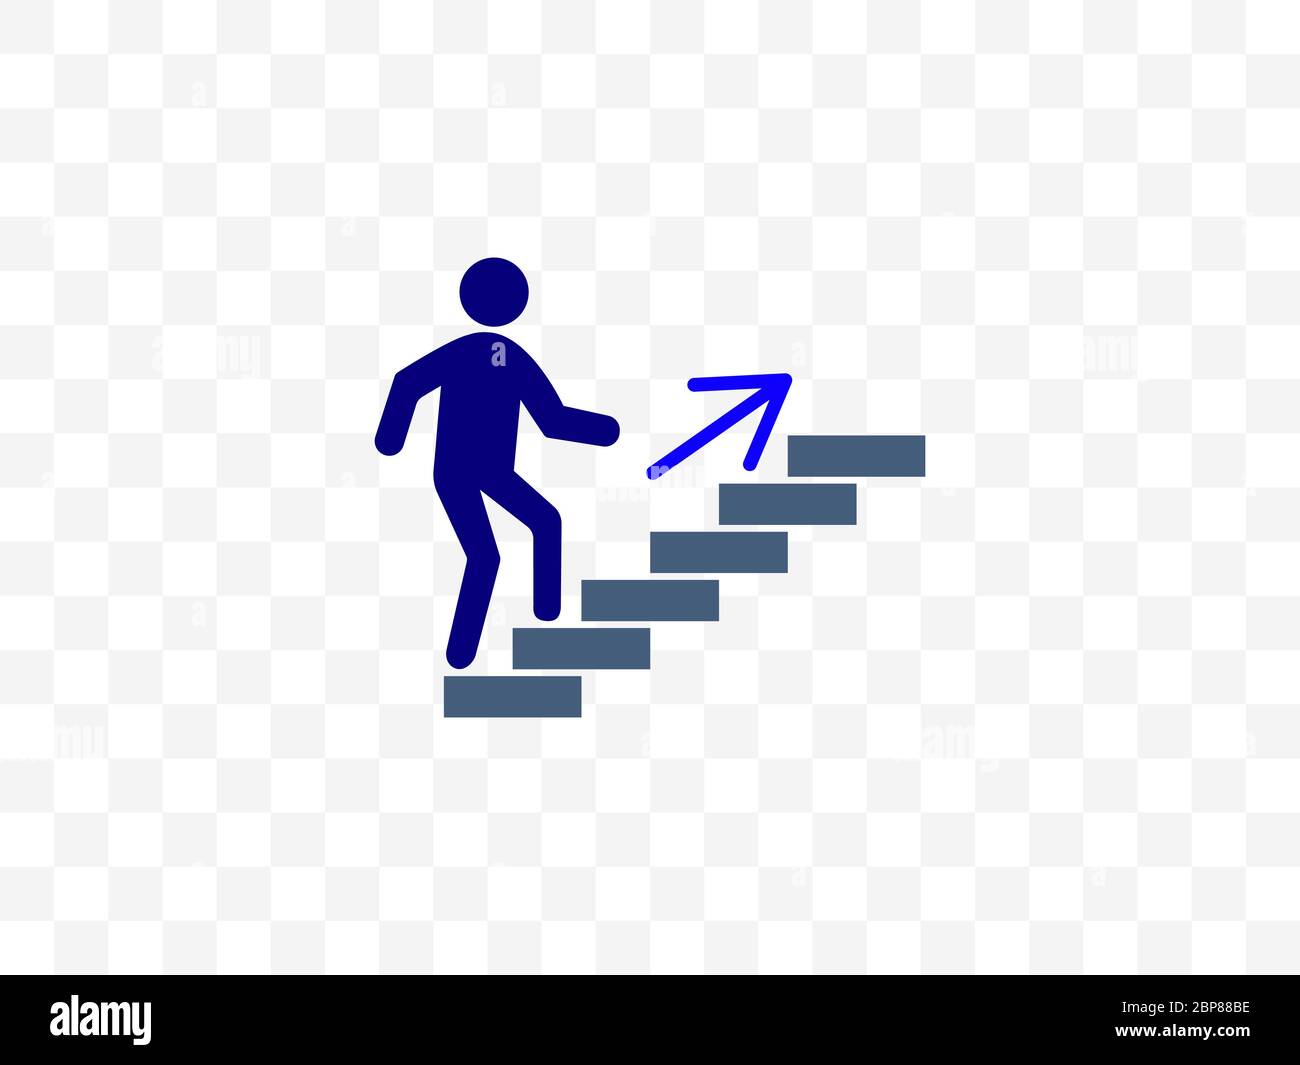 Stairs, stairwell, walks up icon. Vector illustration, flat design. Stock Vector